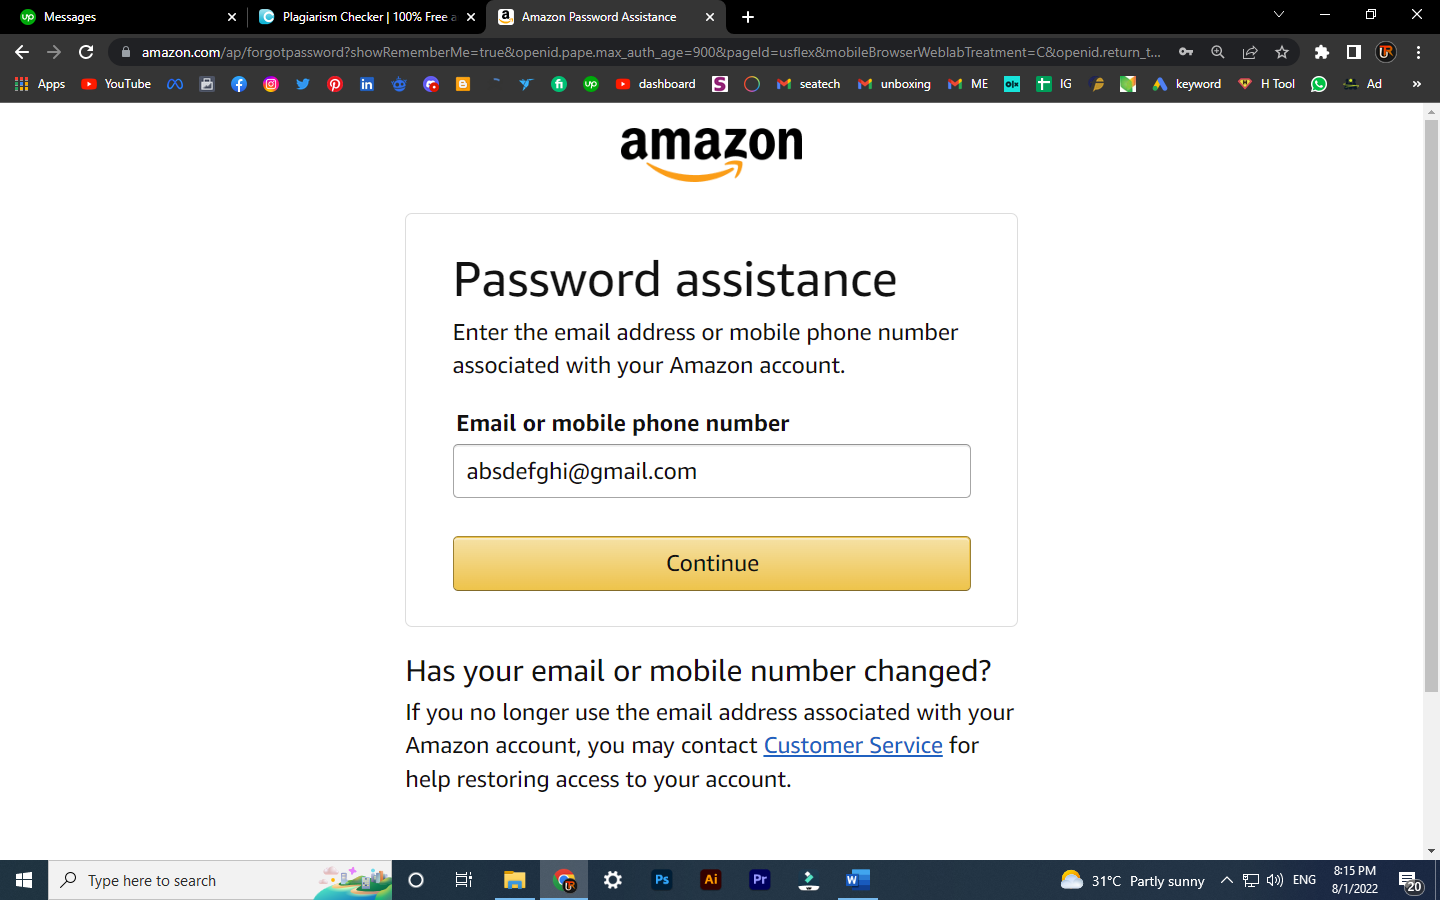 Then enter the email that you used while creating our amazon account.